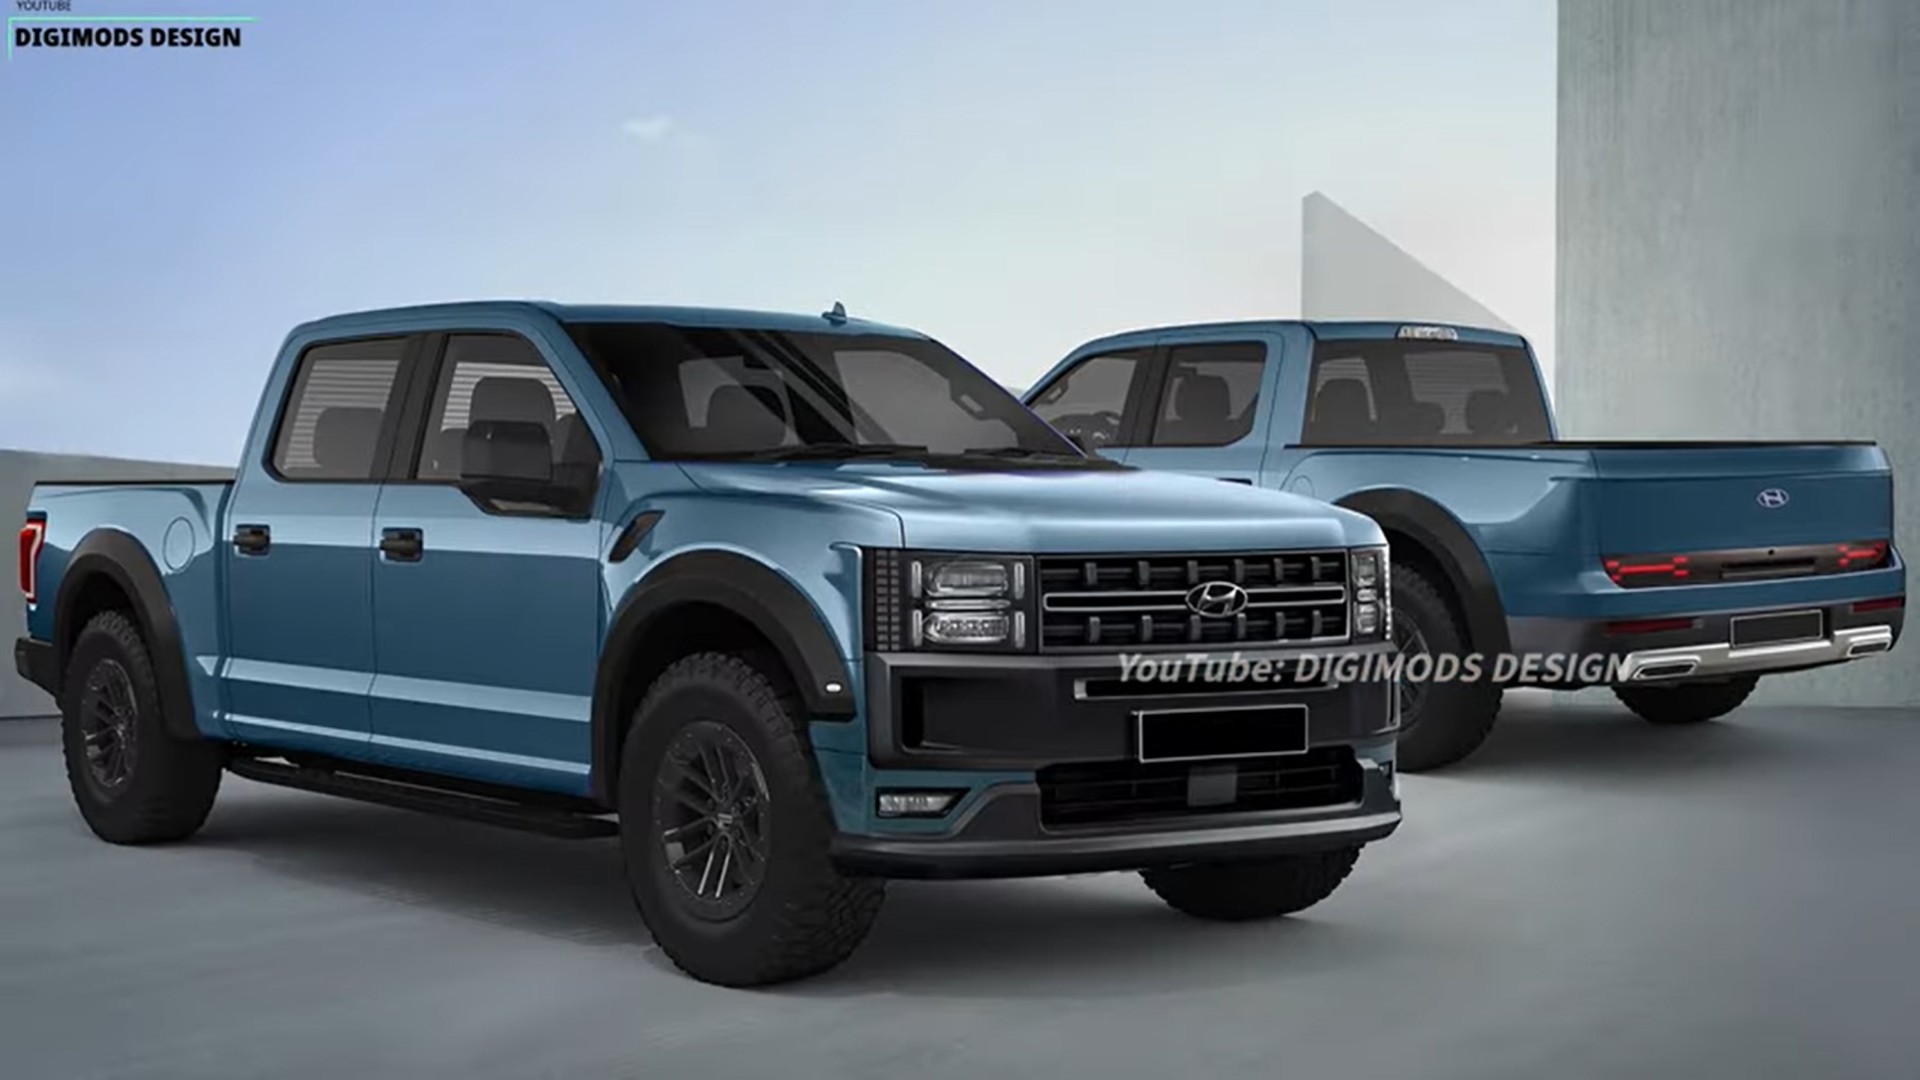 Imagined Hyundai Combines Boxy Looks With F-150 DNA to Join the Pickup ...